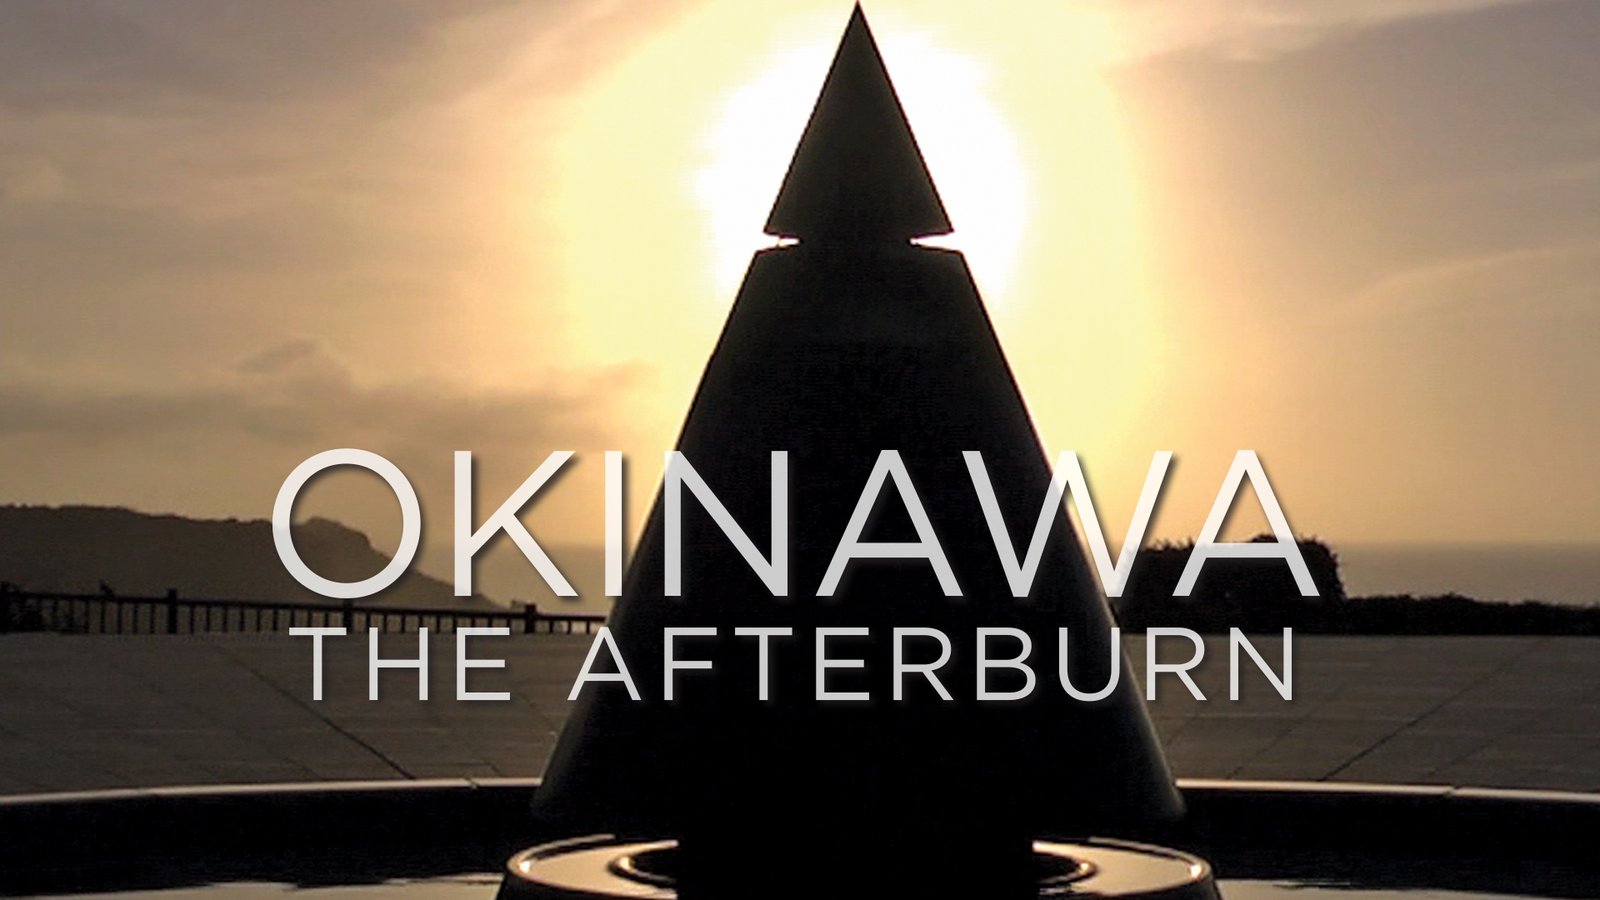 Okinawa: The Afterburn - A Comprehensive Look at the Battle of Okinawa